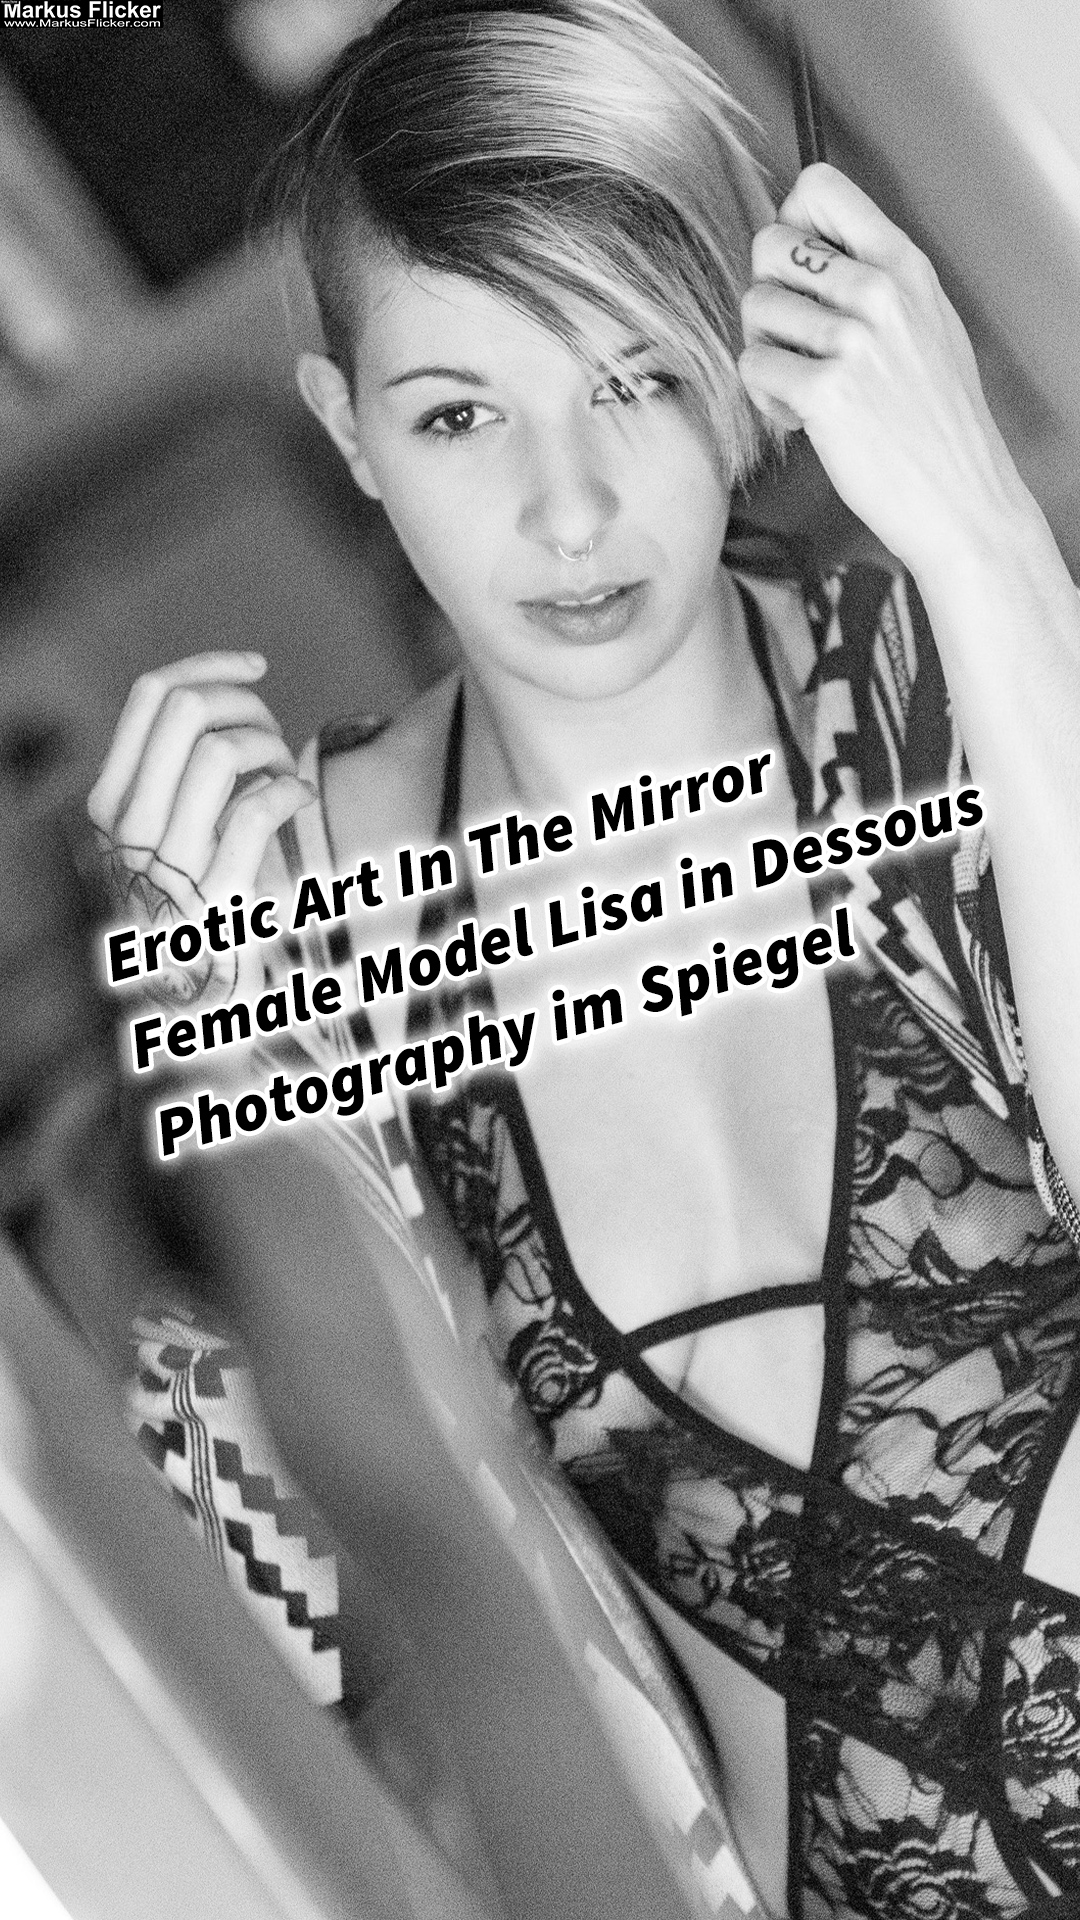 Erotic Art In The Mirror Female Model Lisa in Dessous Photography im Spiegel